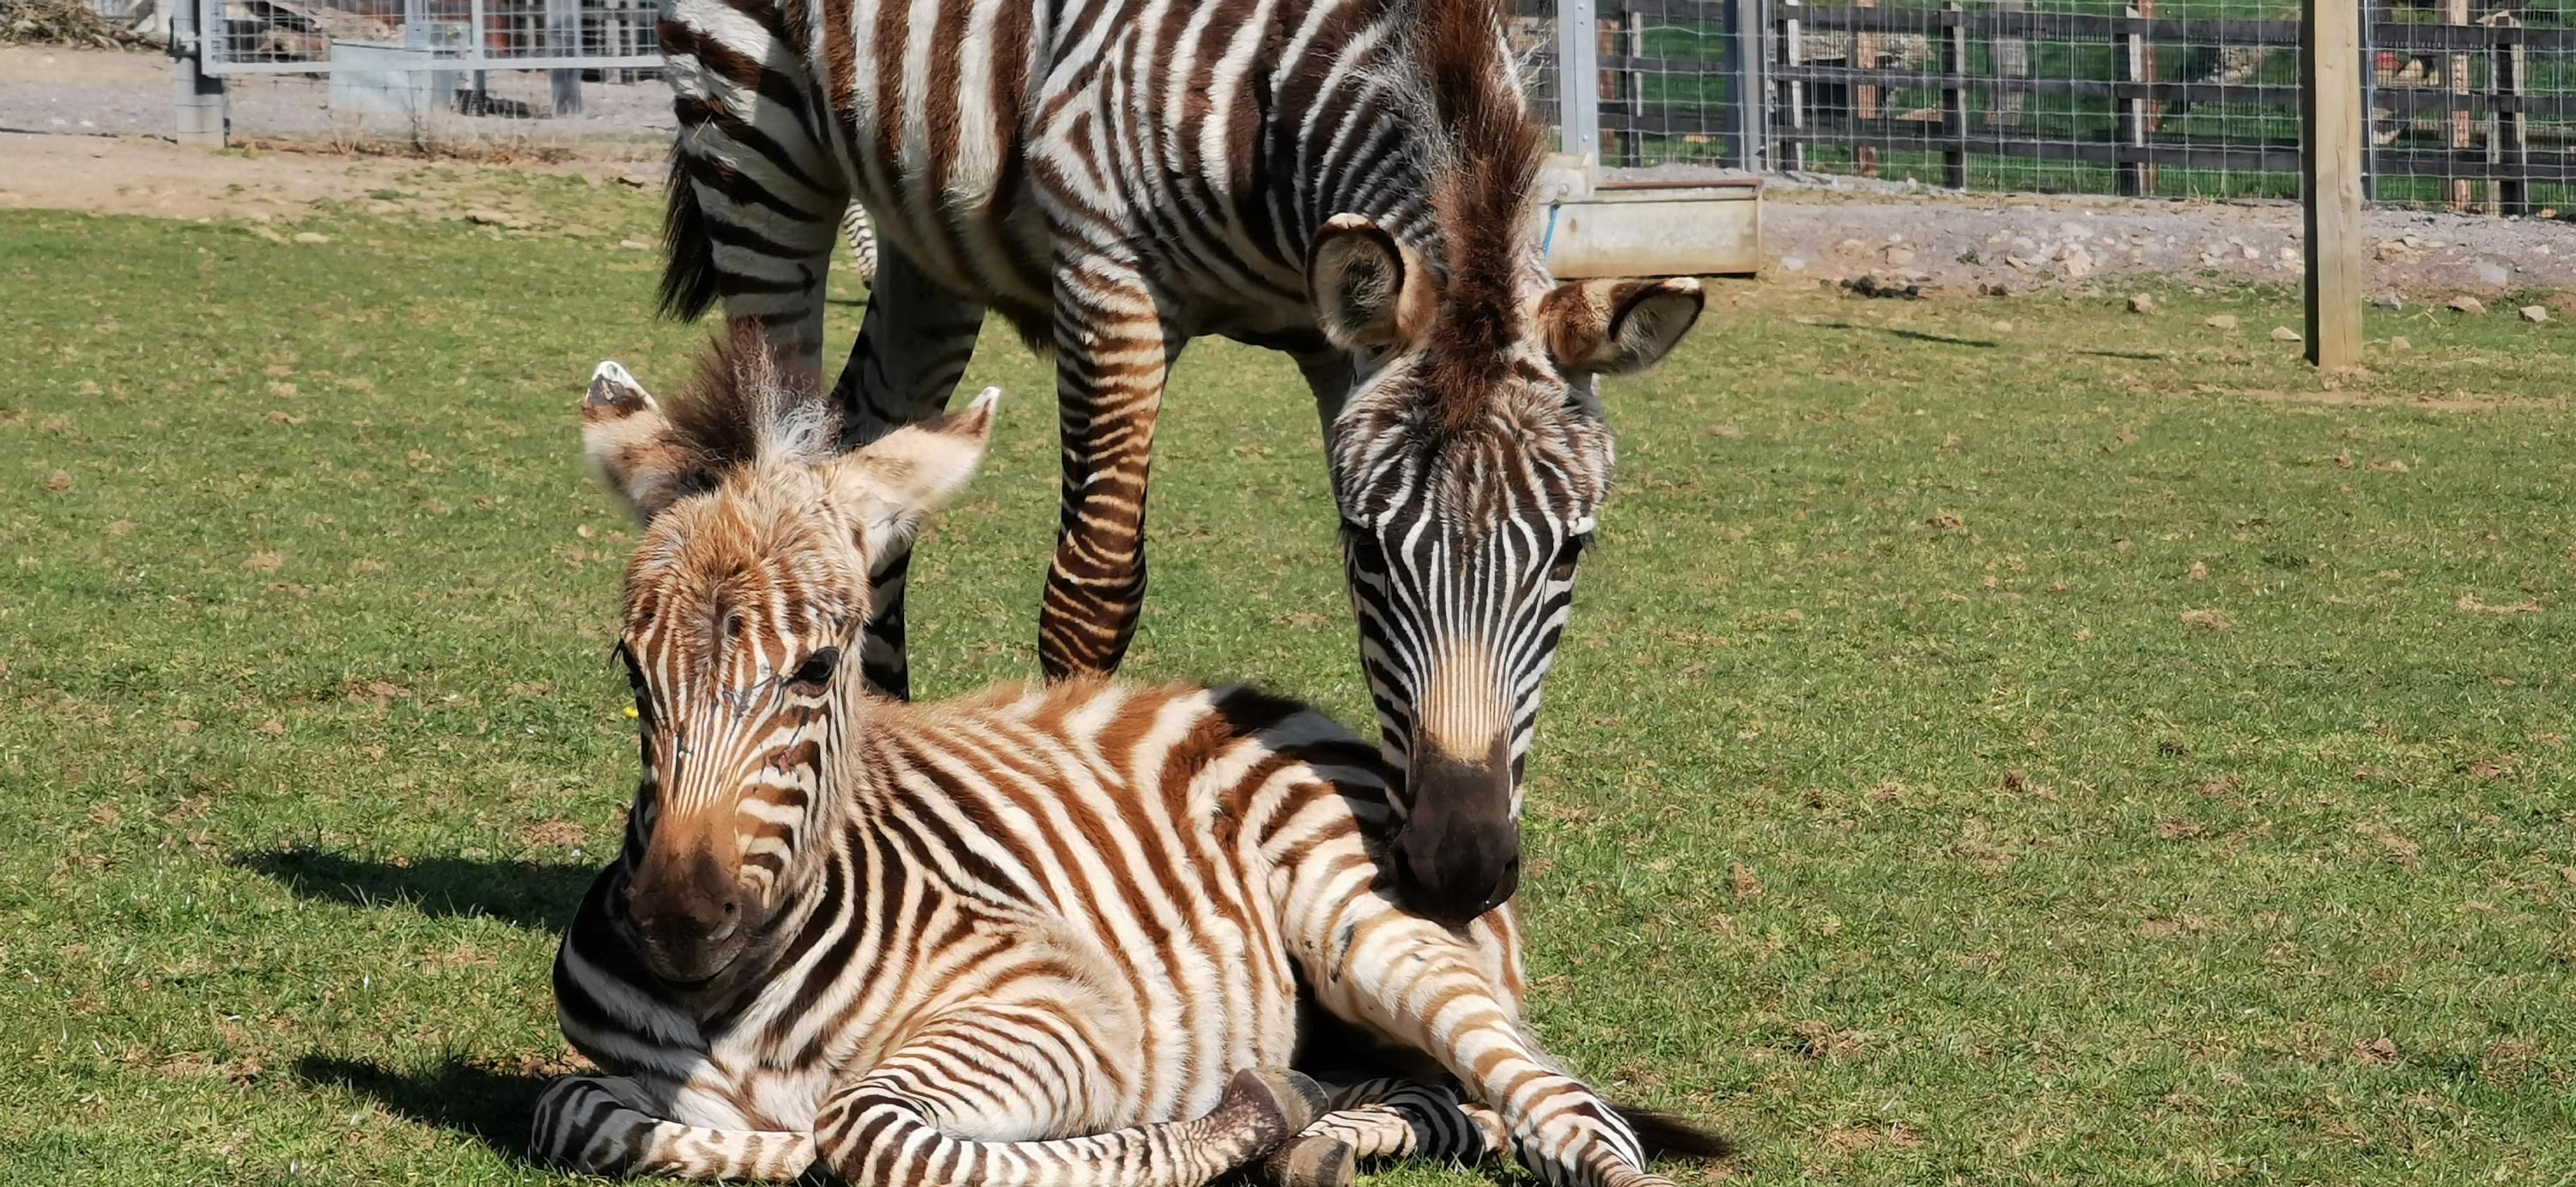 A baby zebra died in a zoo after being startled by fireworks | CNN